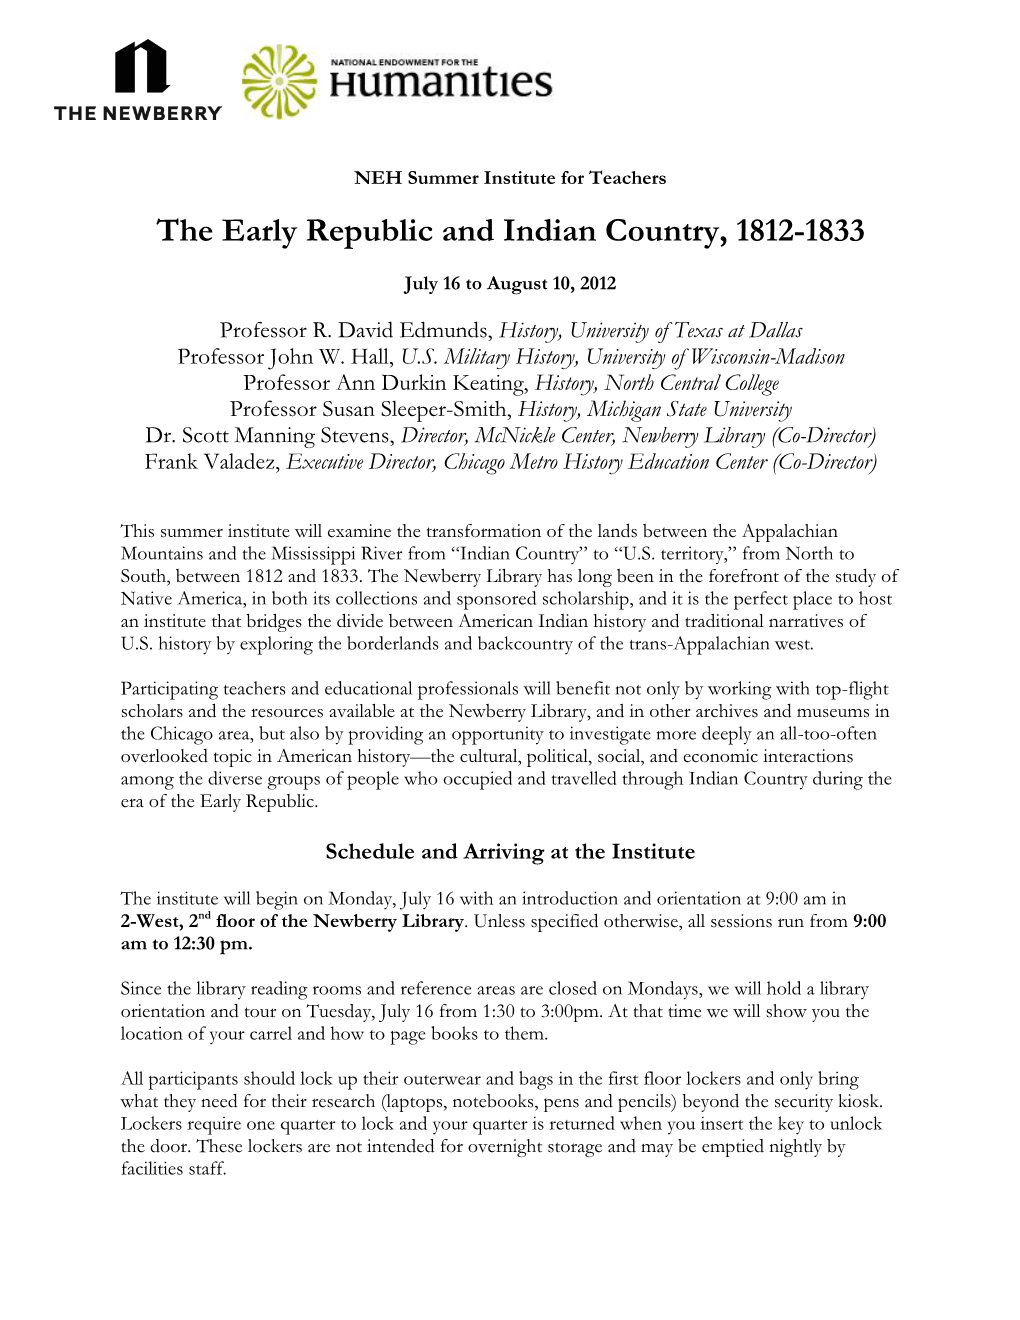 The Early Republic and Indian Country, 1812-1833